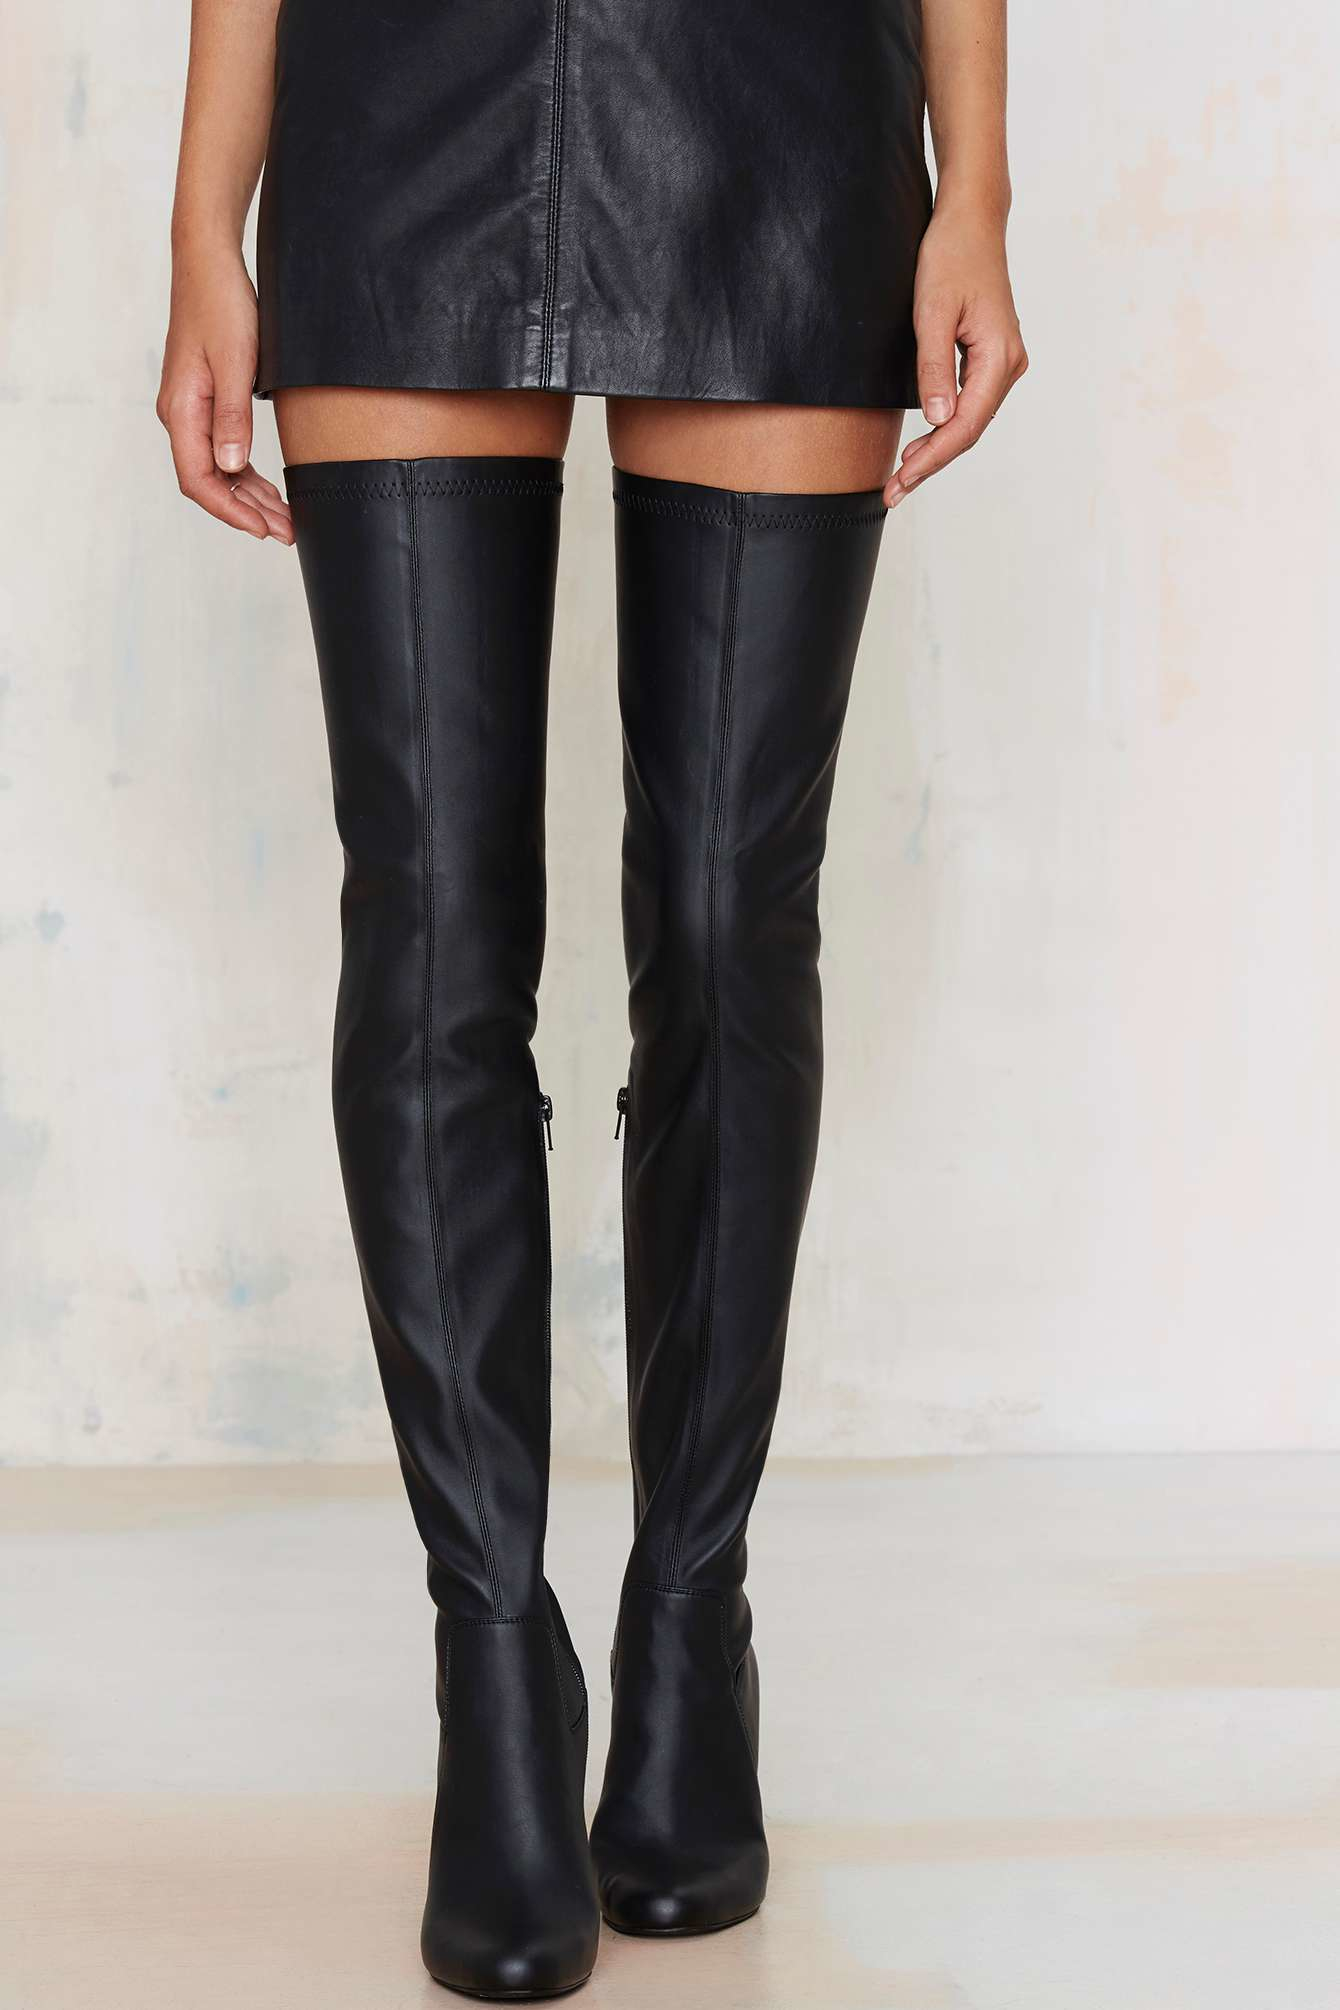 Jeffrey Campbell Perouze Thigh High Boot in Black | Lyst